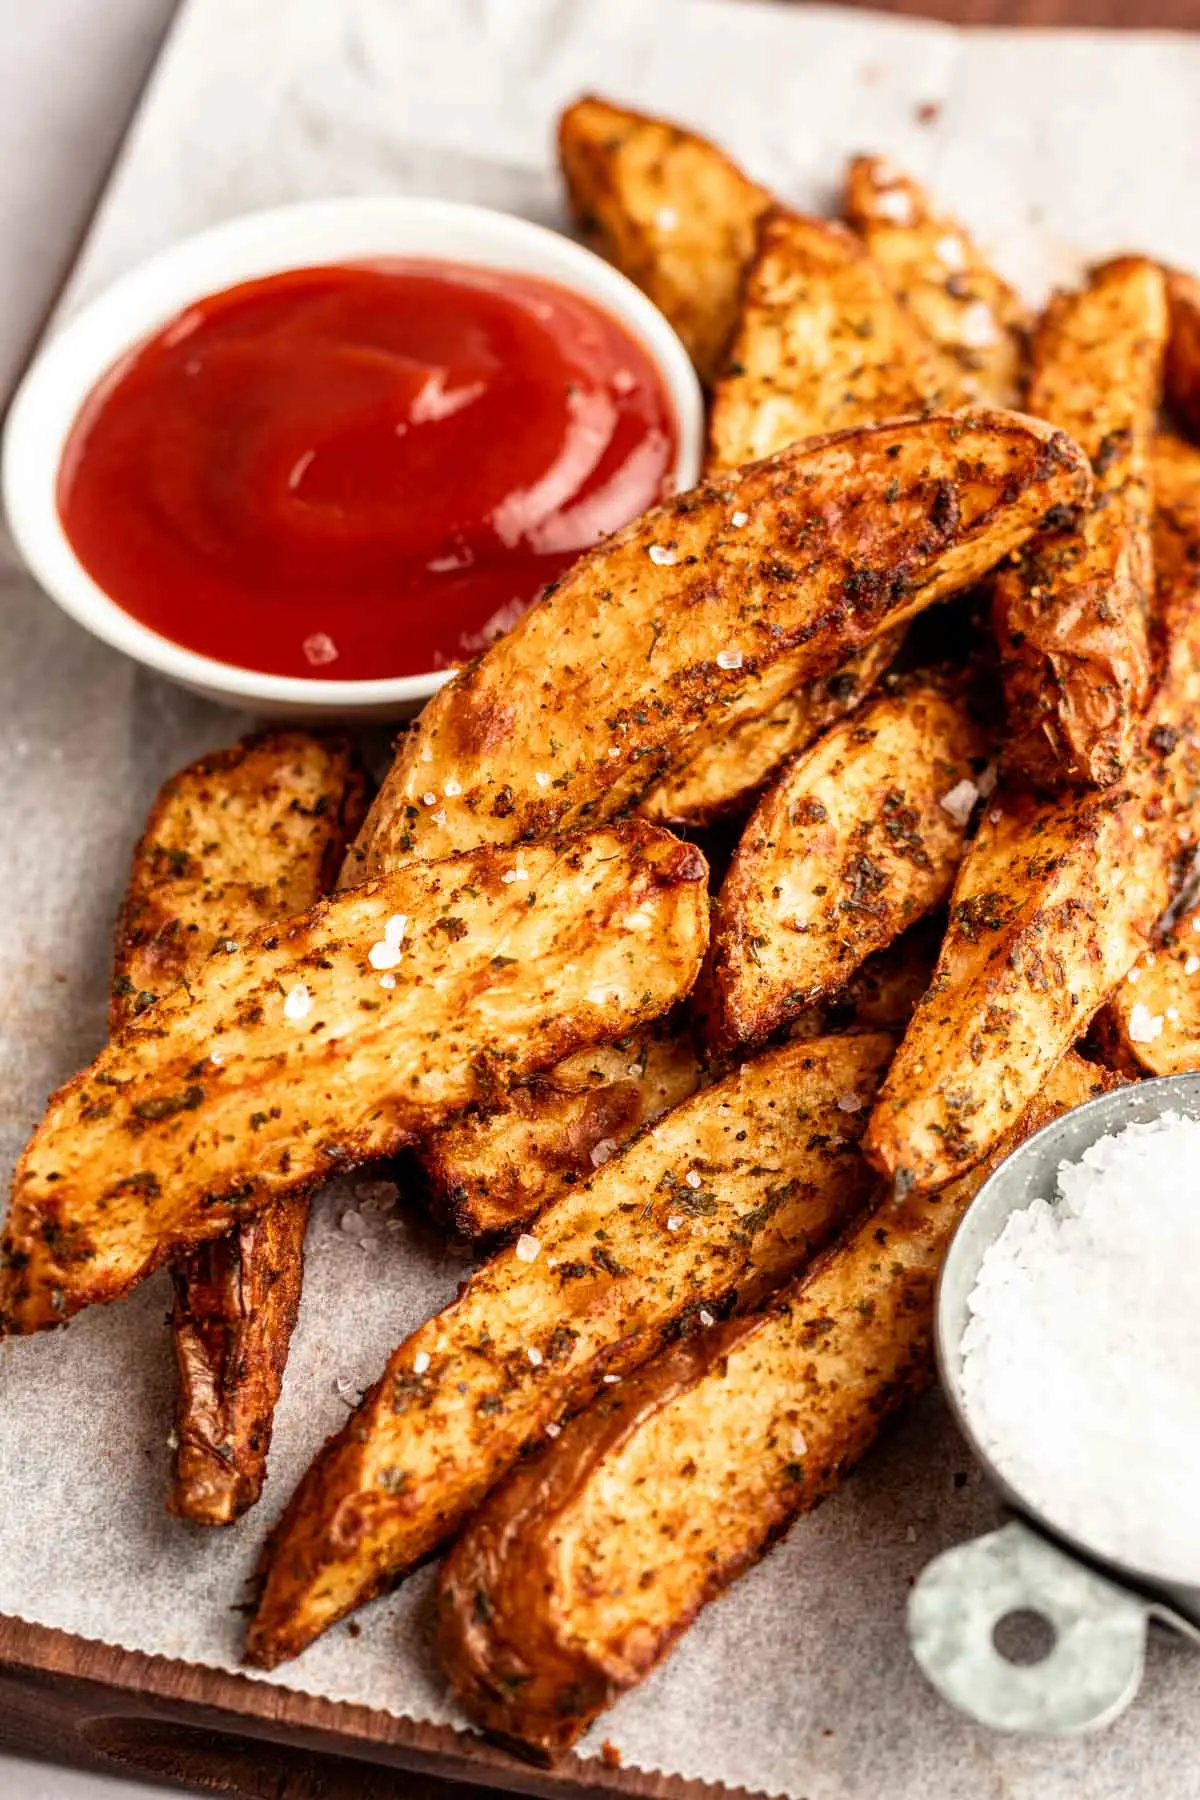 Potato wedges with ketchup and ranch.